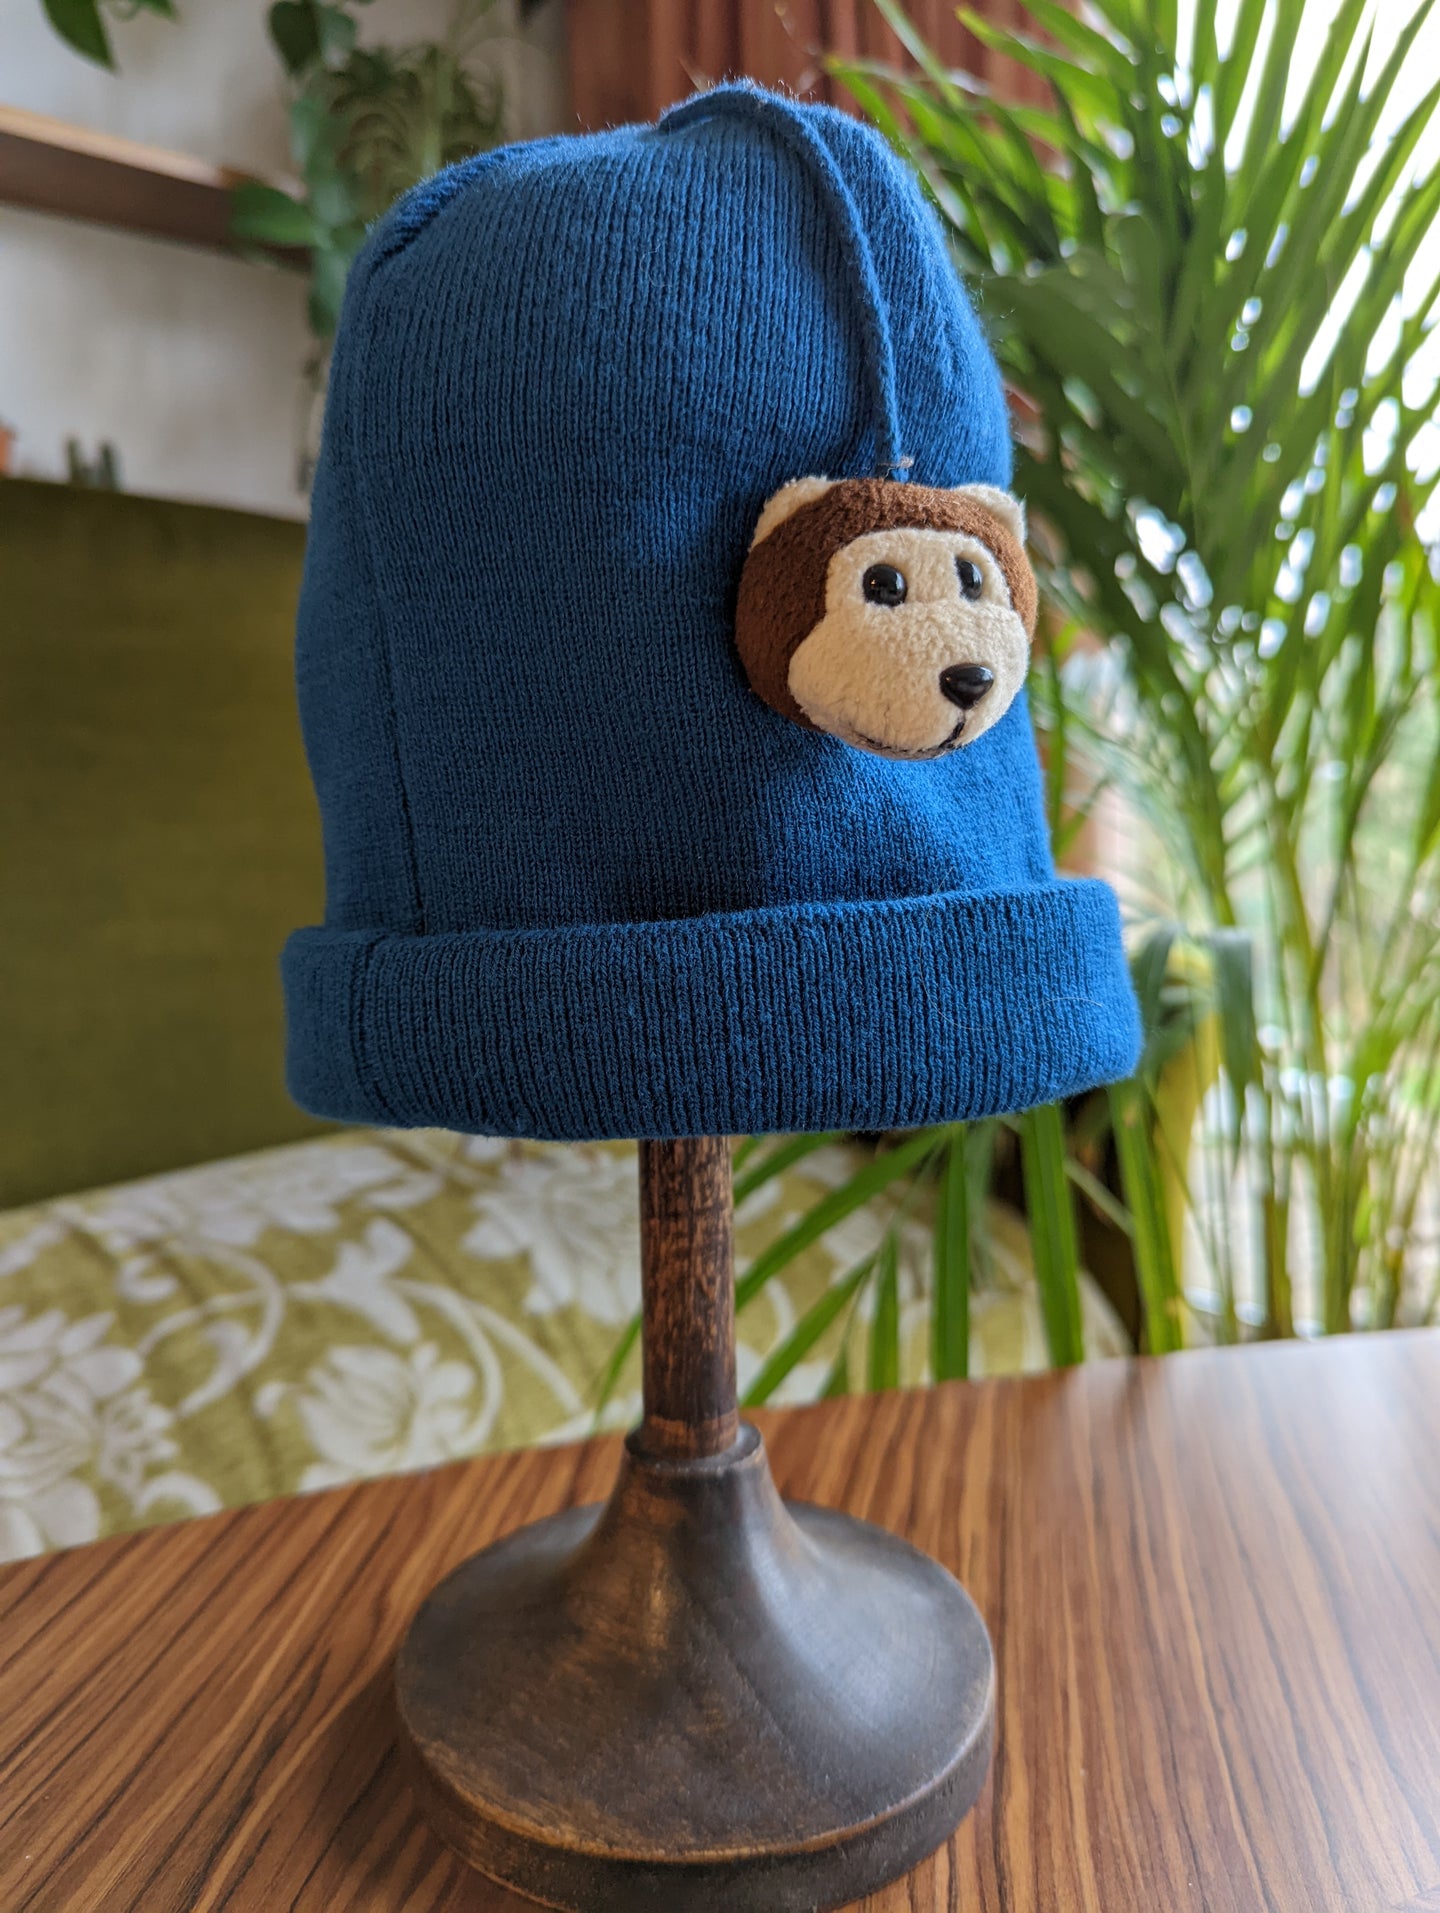 The Cutest Blue Bear Hat - 6 Years